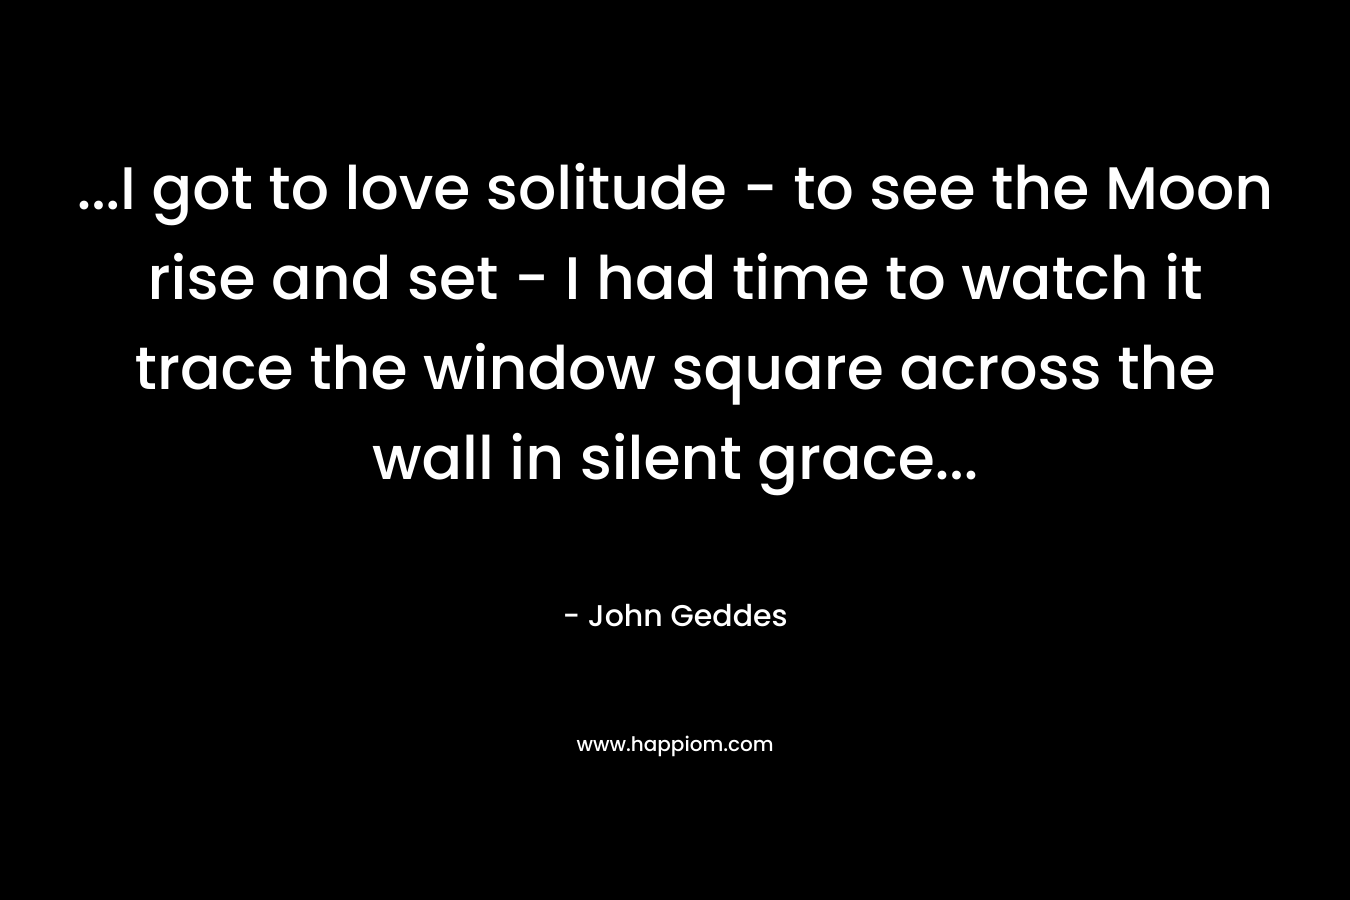 …I got to love solitude – to see the Moon rise and set – I had time to watch it trace the window square across the wall in silent grace… – John Geddes